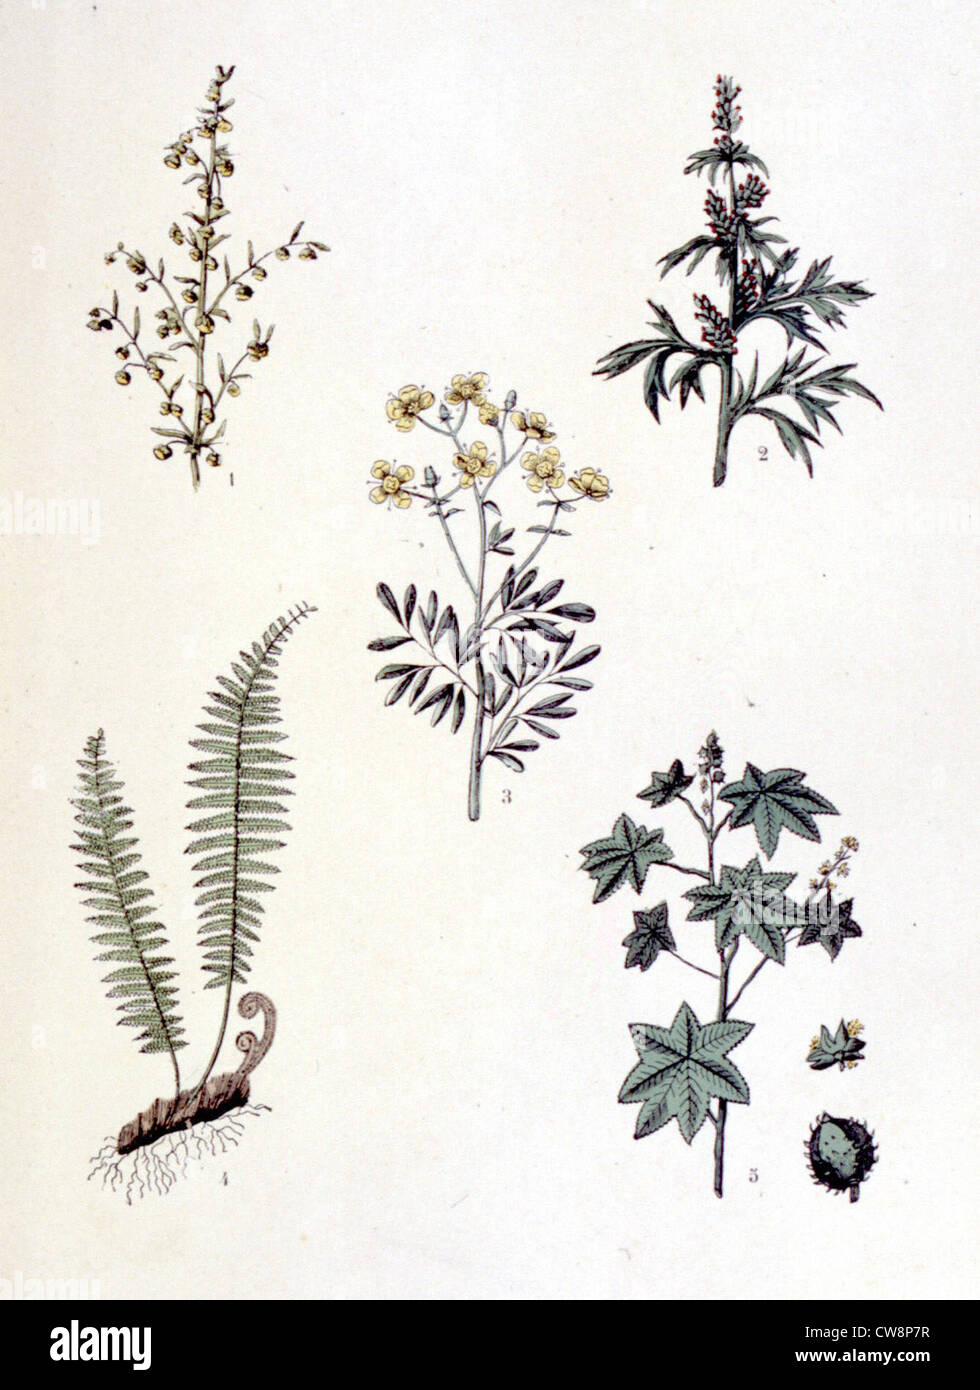 Common medicinal plants, representations from the late 19th century Stock Photo